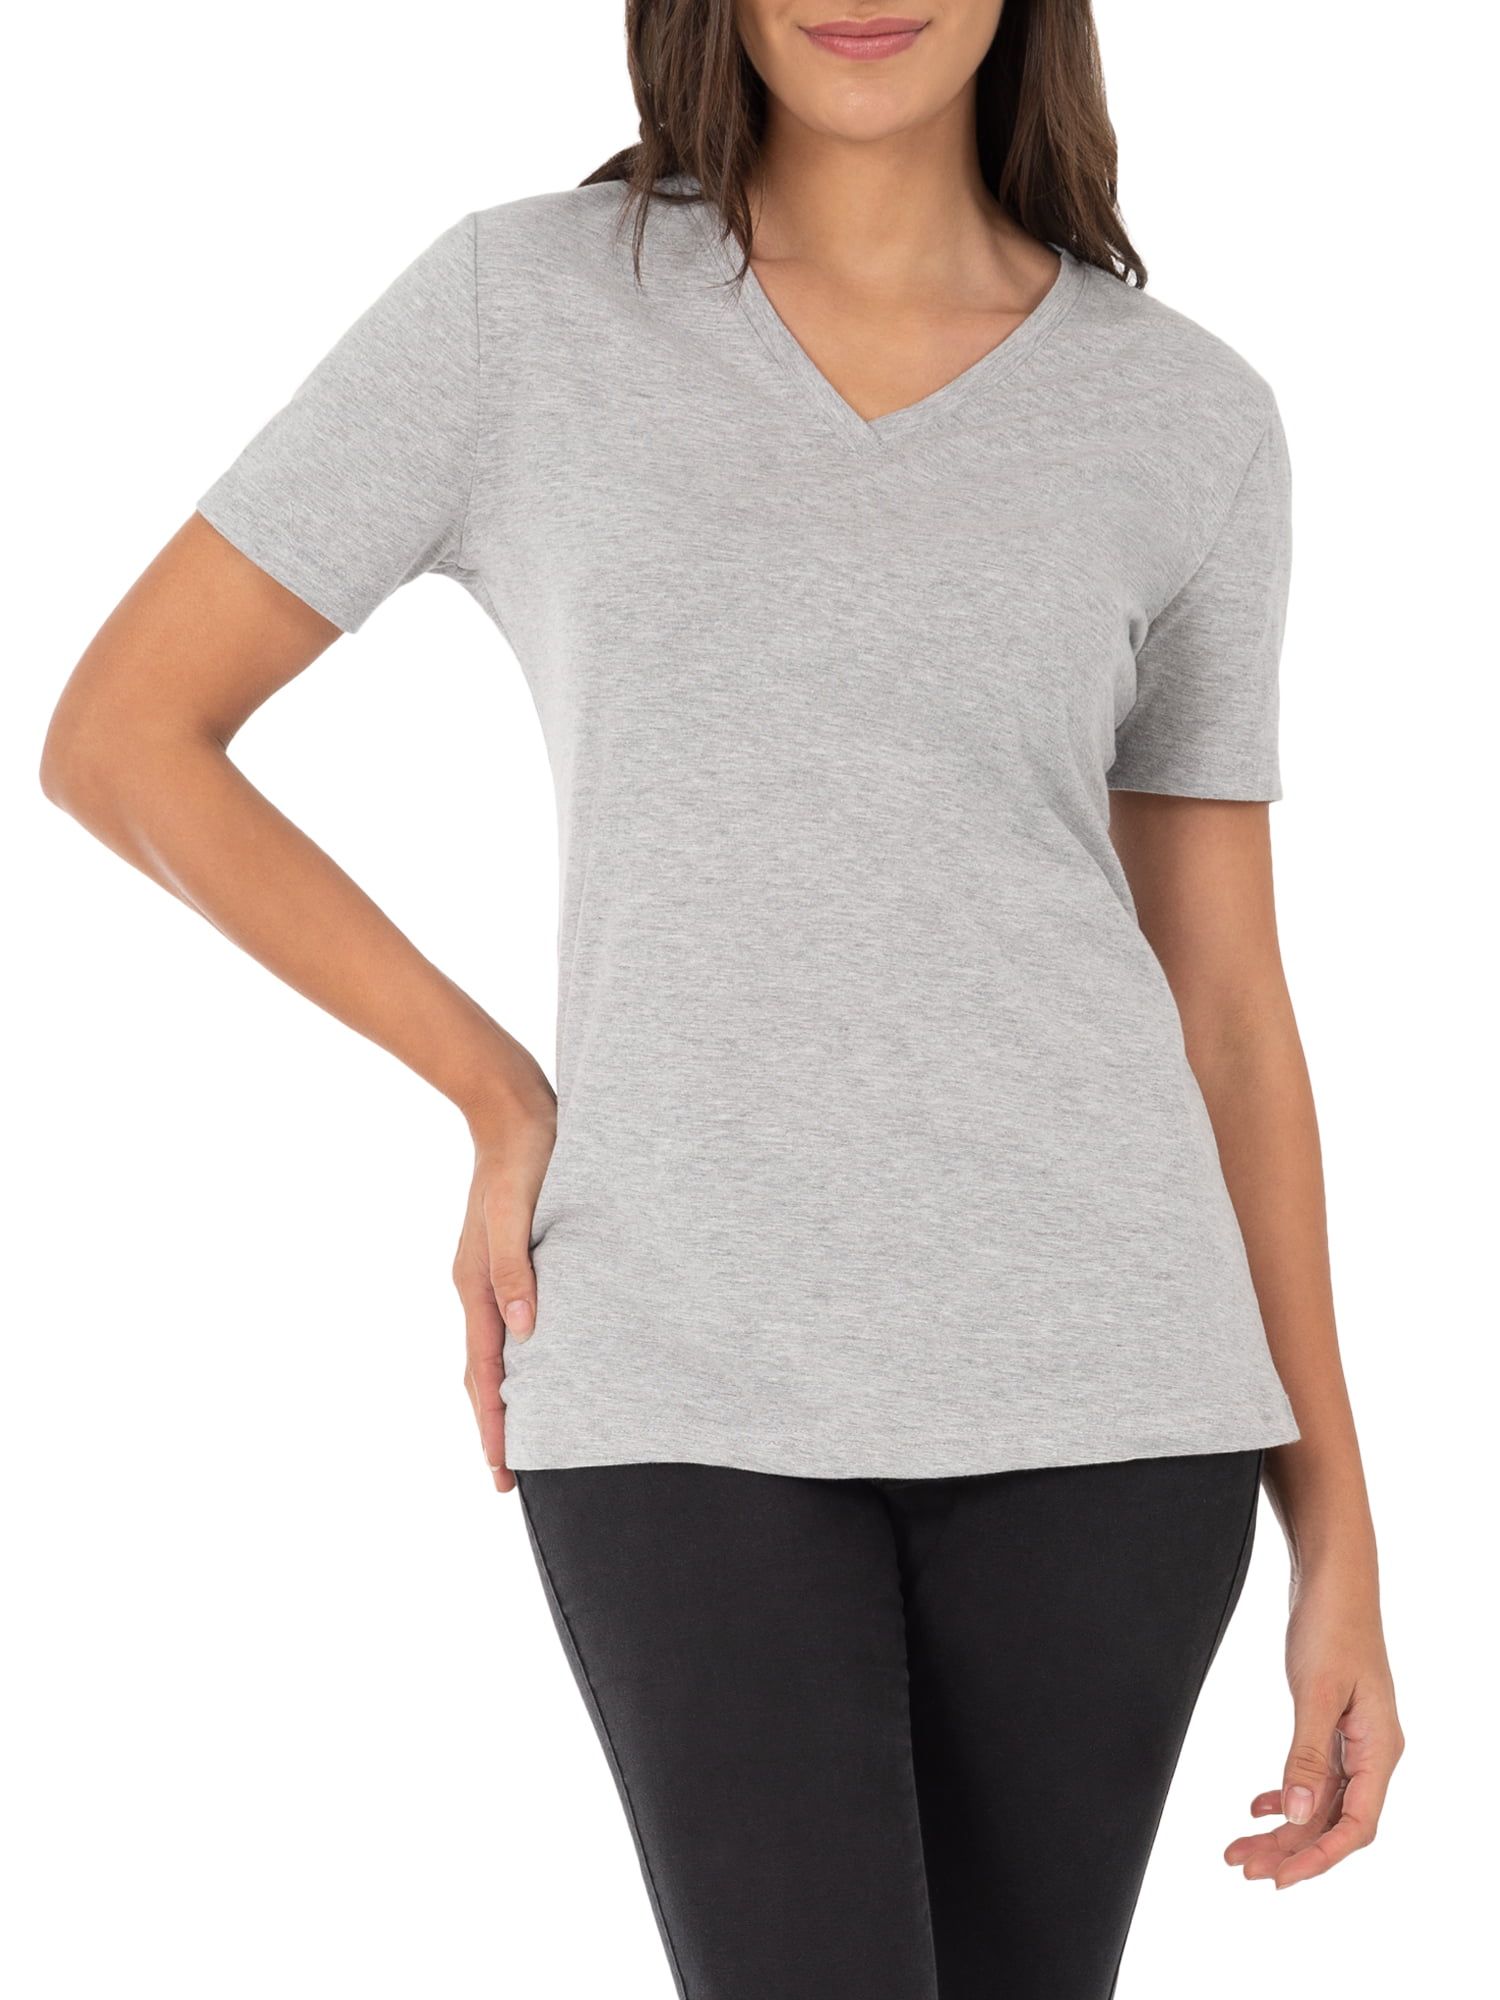 Womens Active V-Neck T Shirts Layering Short Sleeve Comfort Daily Wear Skating Basic Essential Tee 